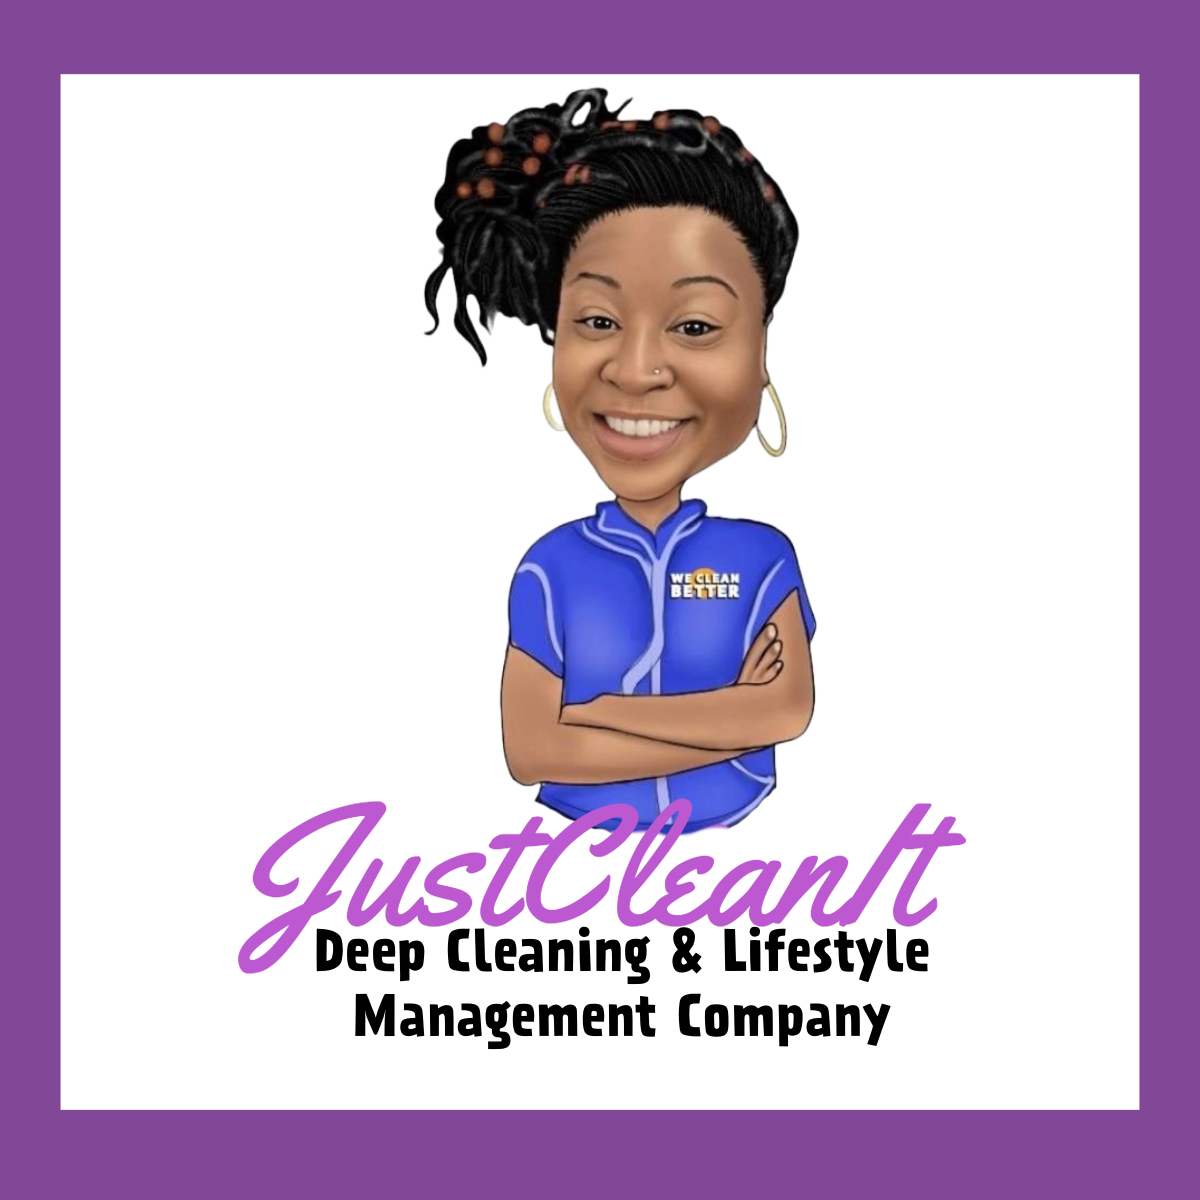 Cleaning Company In Canada -Just Clean It